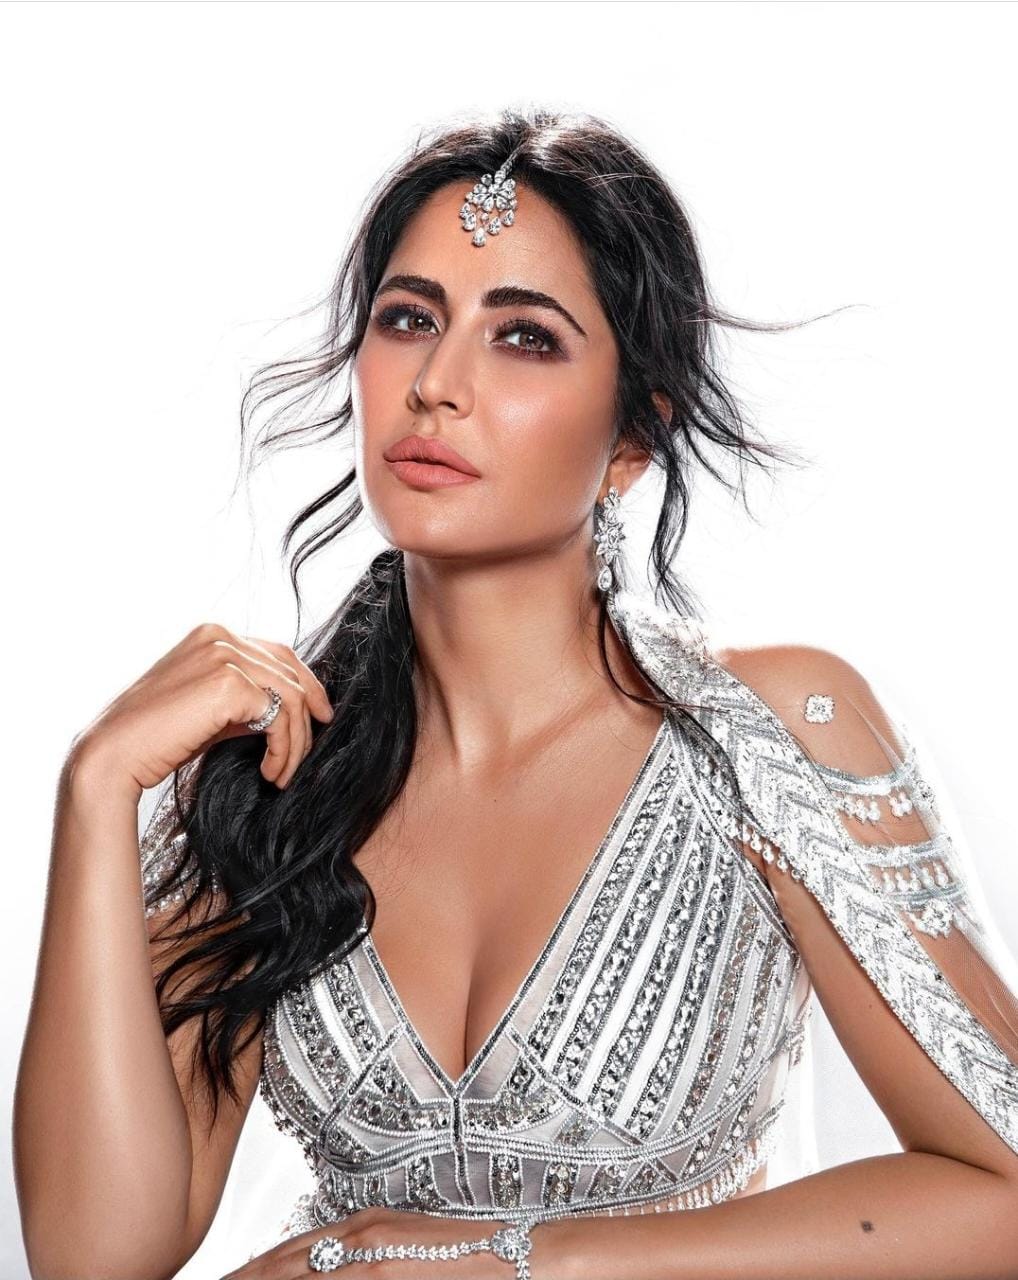 2022 Most Searched Asians on Google: Katrina Kaif tops among Indian actors